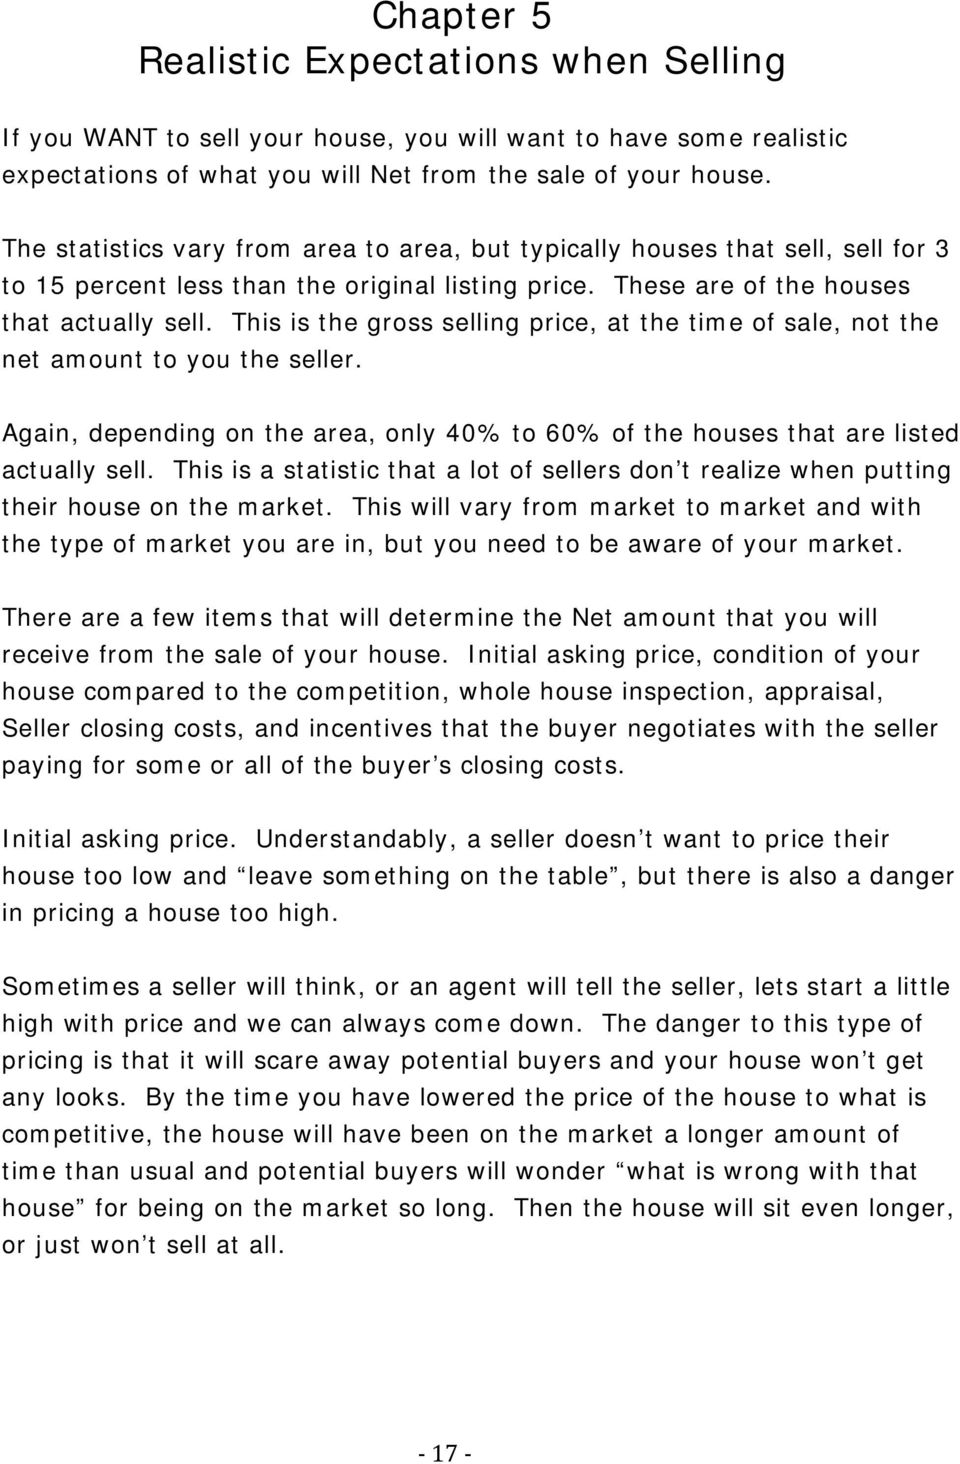 This is the gross selling price, at the time of sale, not the net amount to you the seller. Again, depending on the area, only 40% to 60% of the houses that are listed actually sell.